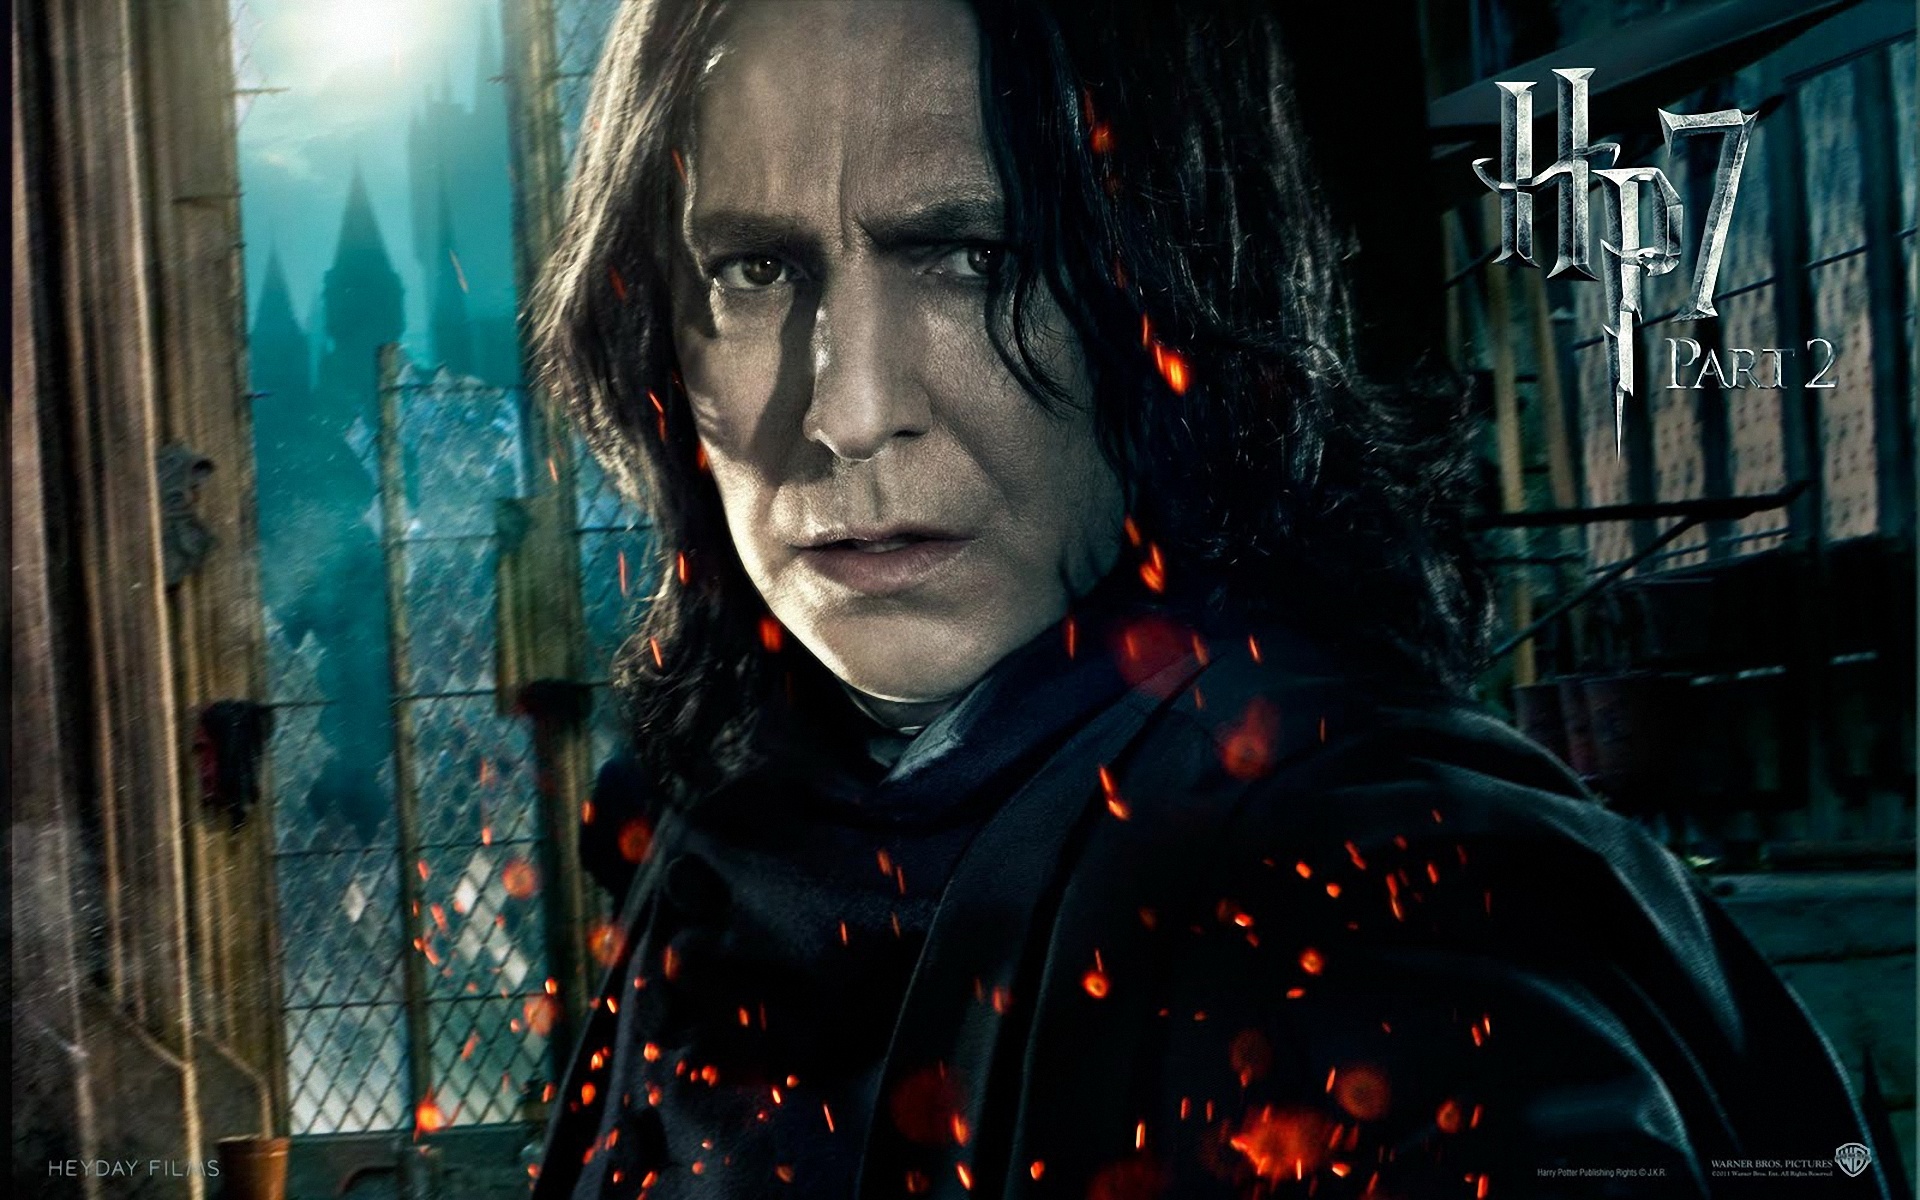 Harry Potter 7 HD Wallpapers 1920x1200 Wallpapers 1920x1200